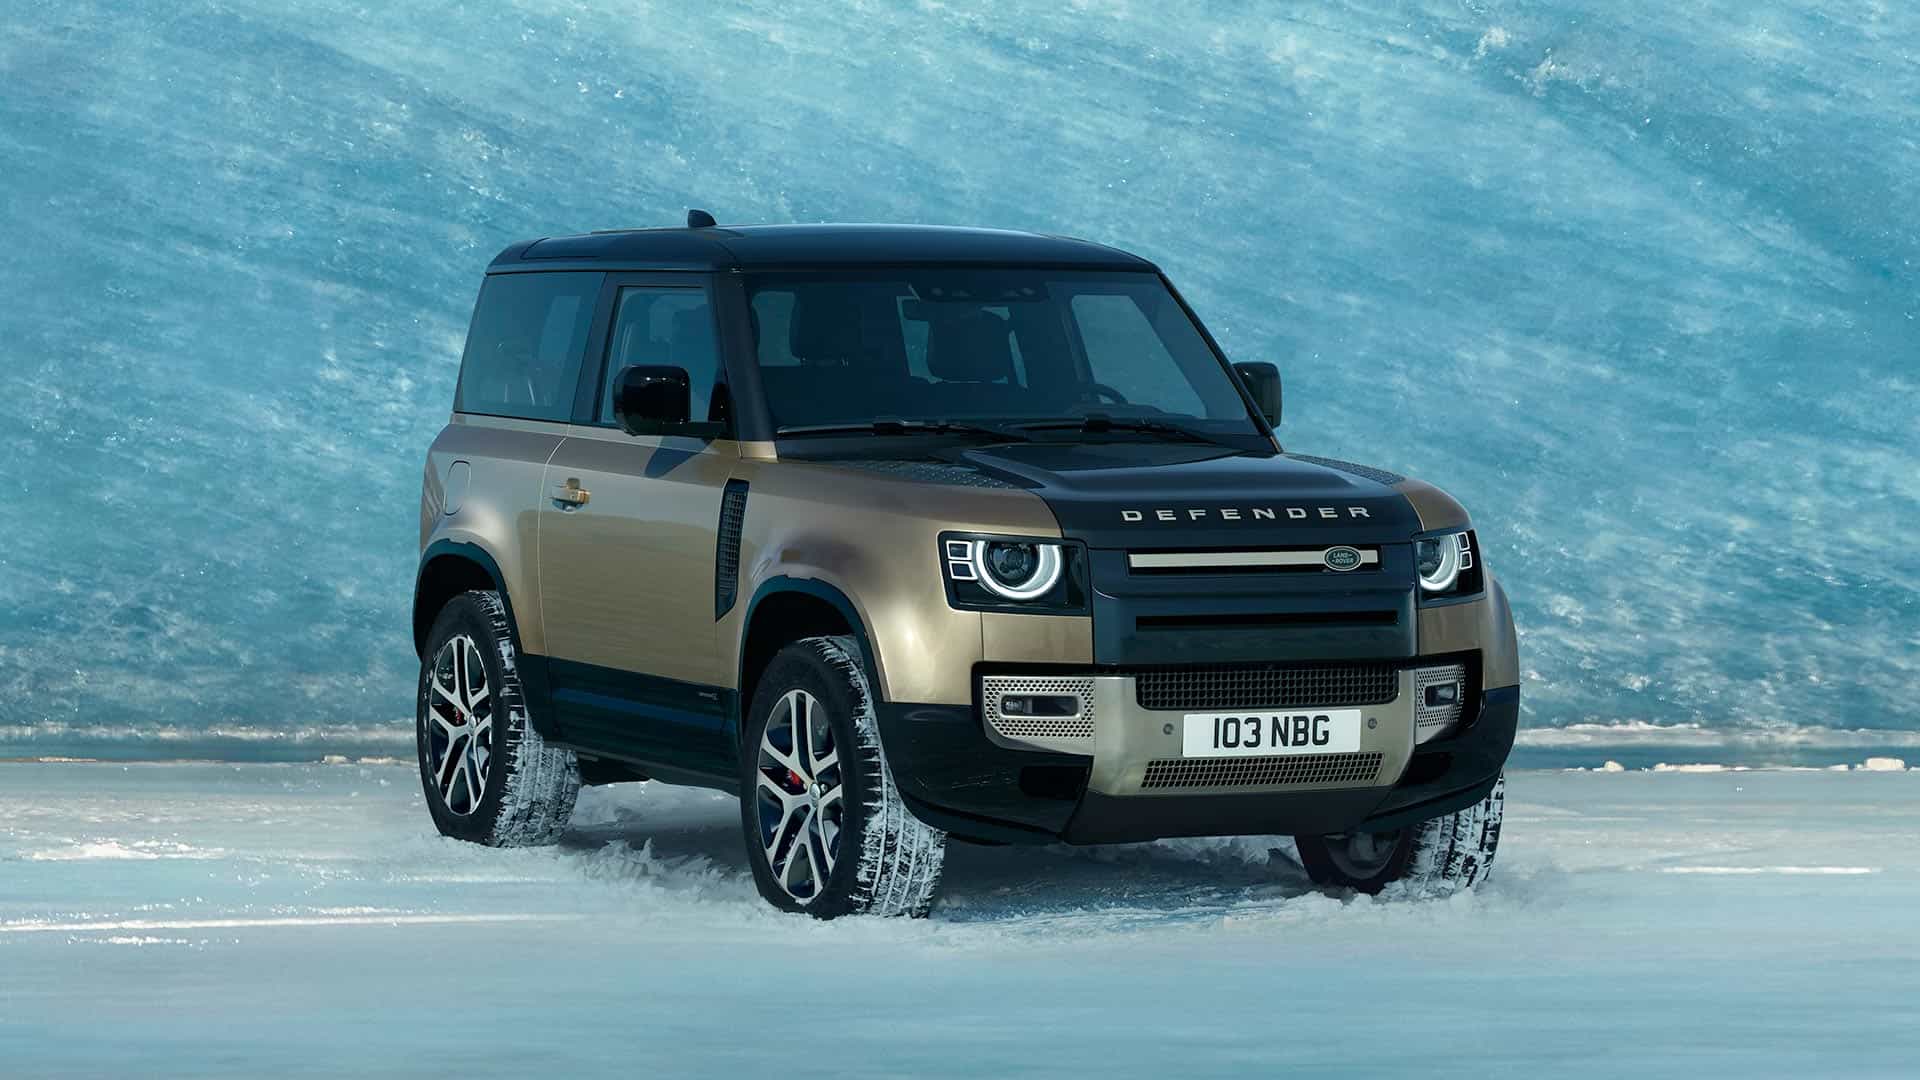 Land Rover Defender in snow scenery